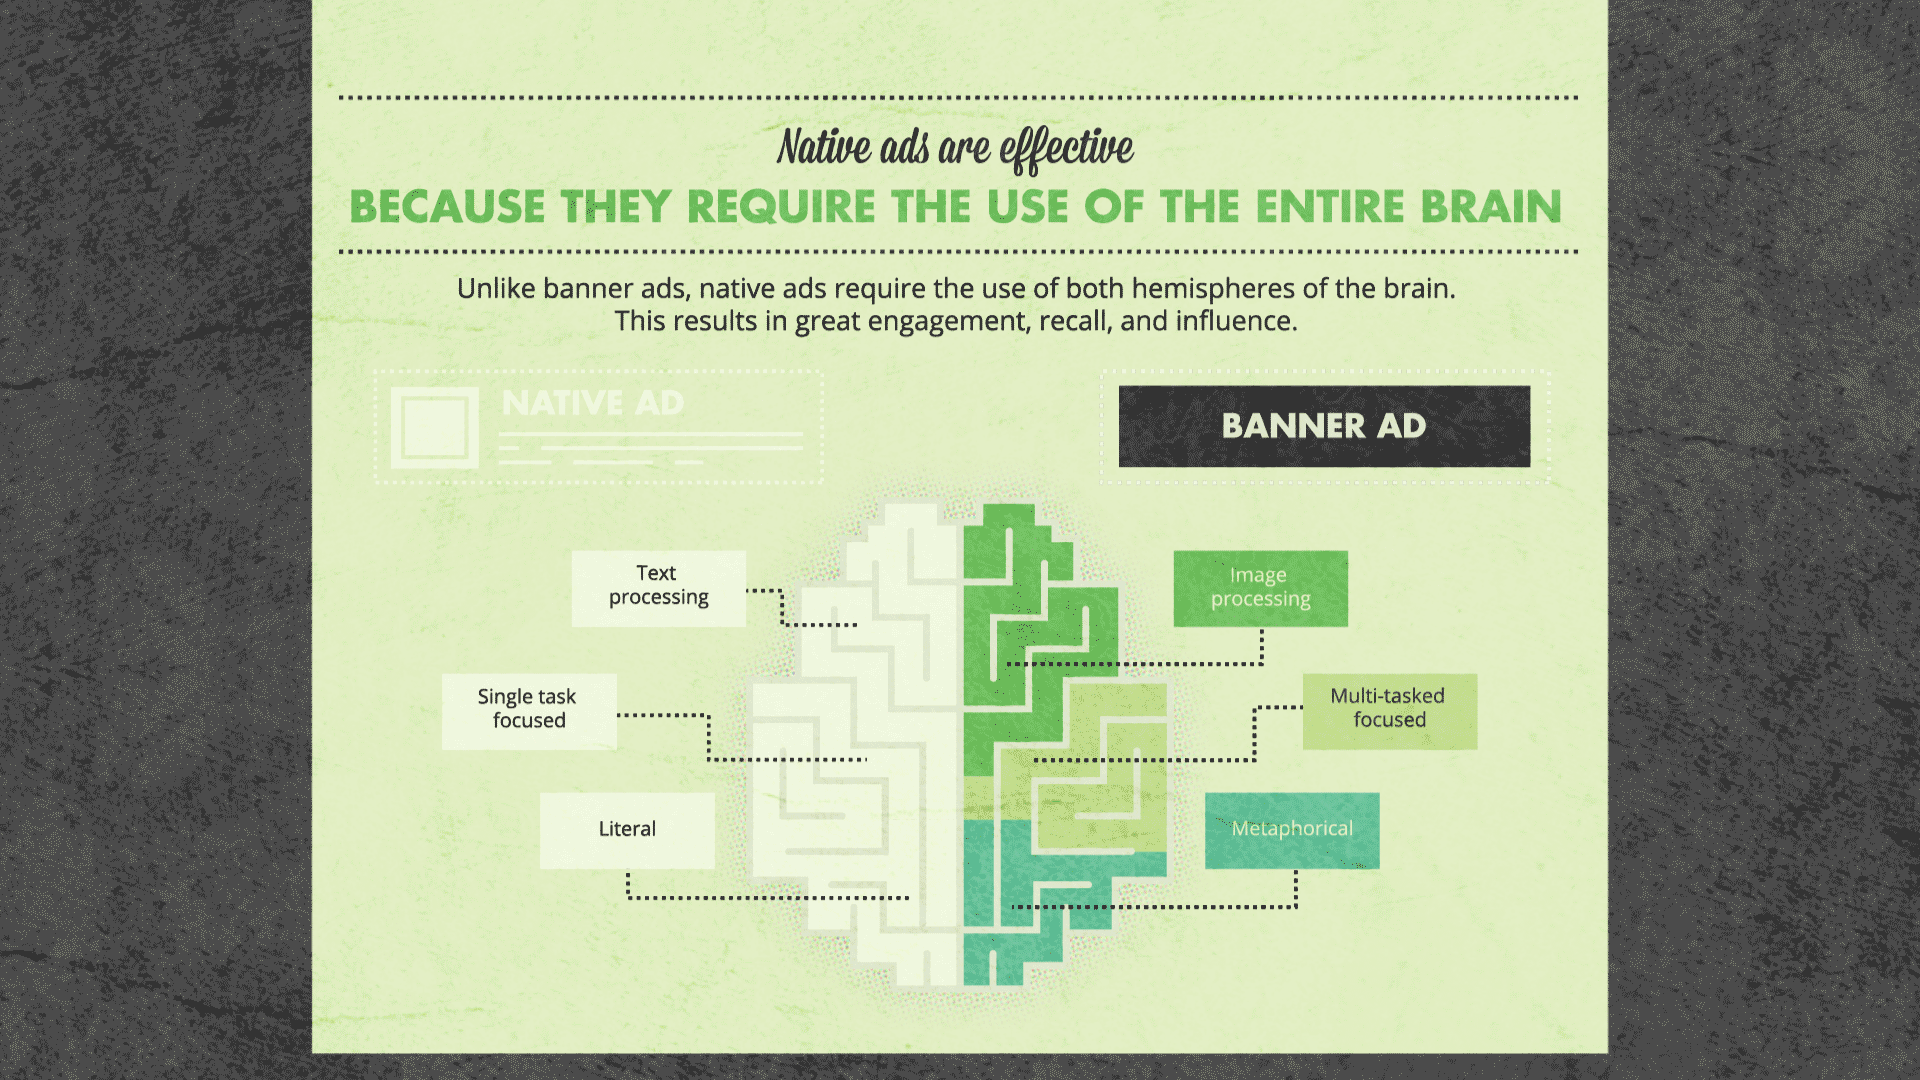 Column Five with Sharethrough "Native Ad Science" - "Native ads are effective because they require the use of the entire brain..."